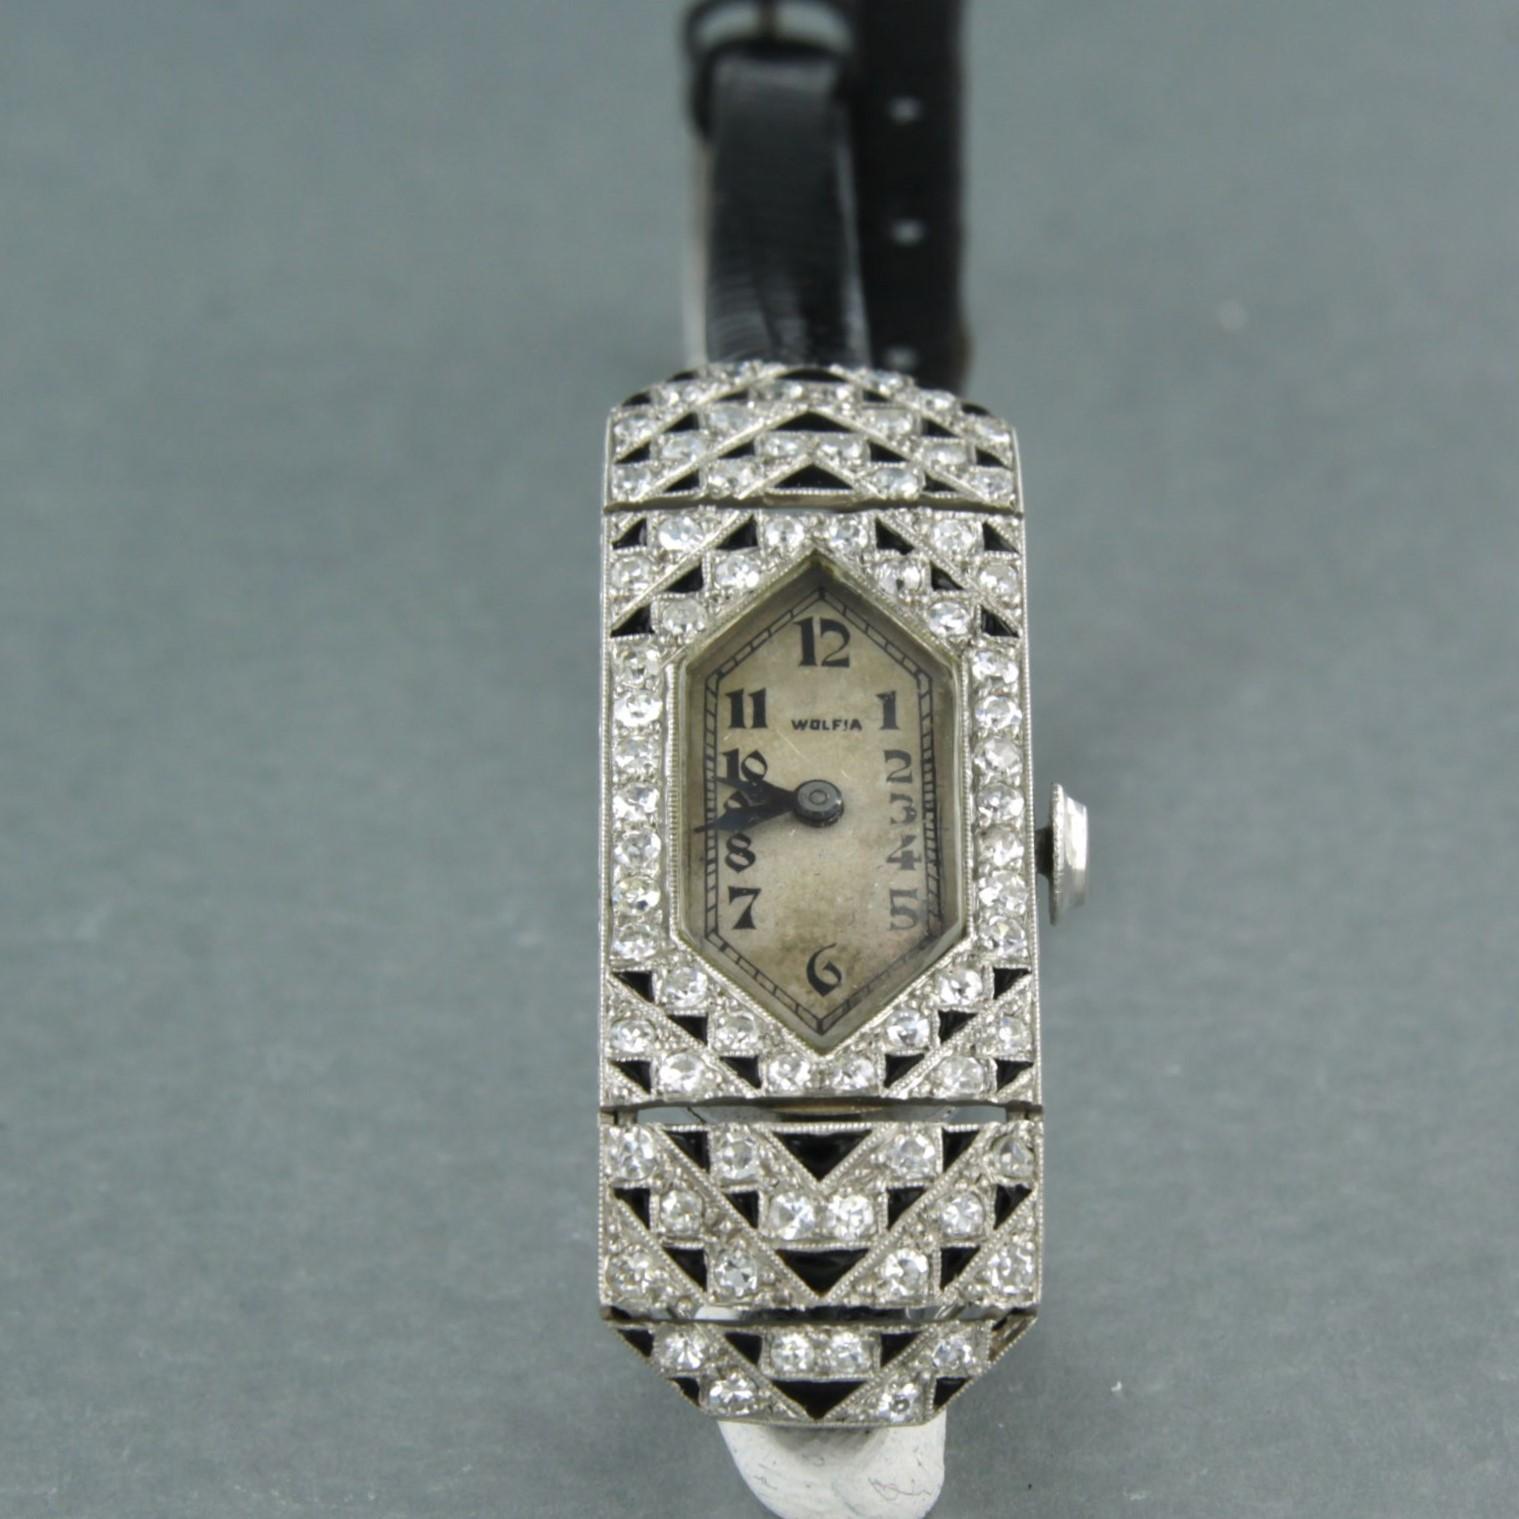 Platinum ladies watch decorated with enamel and set with old single cut diamonds. 1.00ct - F/G - VS/SI

detailed description:

The movement of the watch is an anchor escapement and is completely jeweled. Movement has been overhauled and runs well.